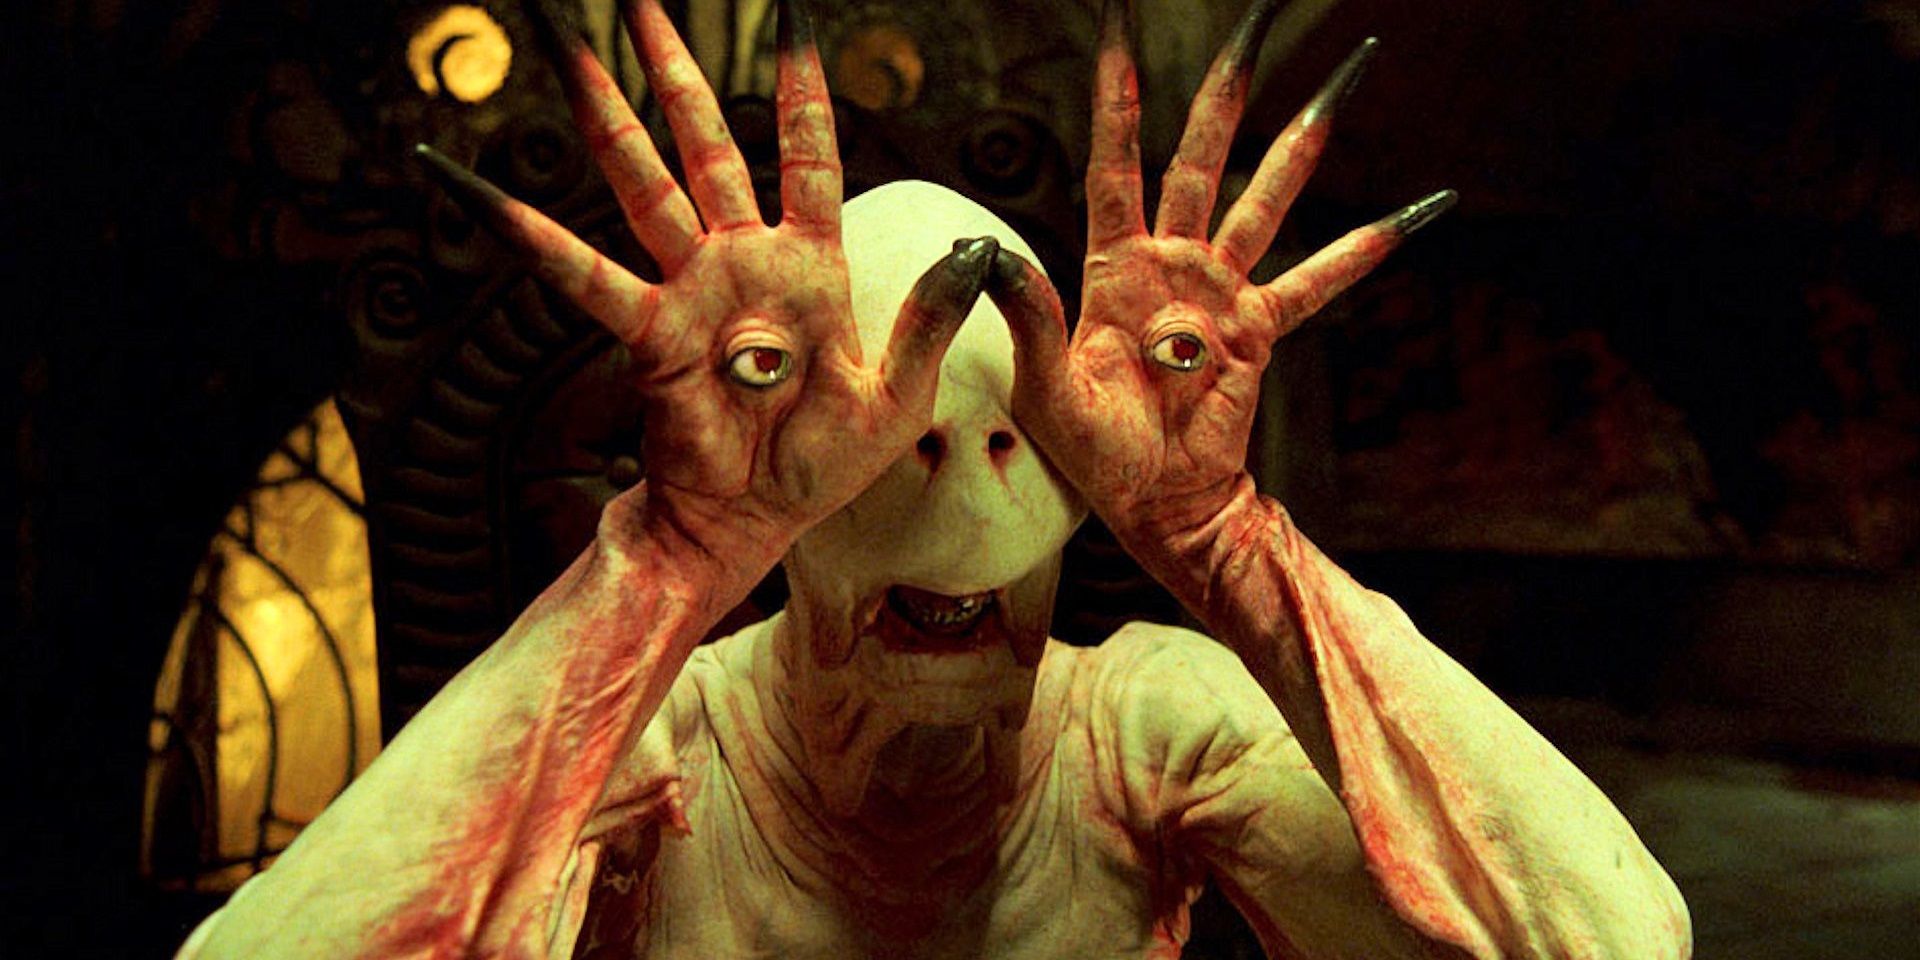 The Pale Man in Pan's Labyrinth